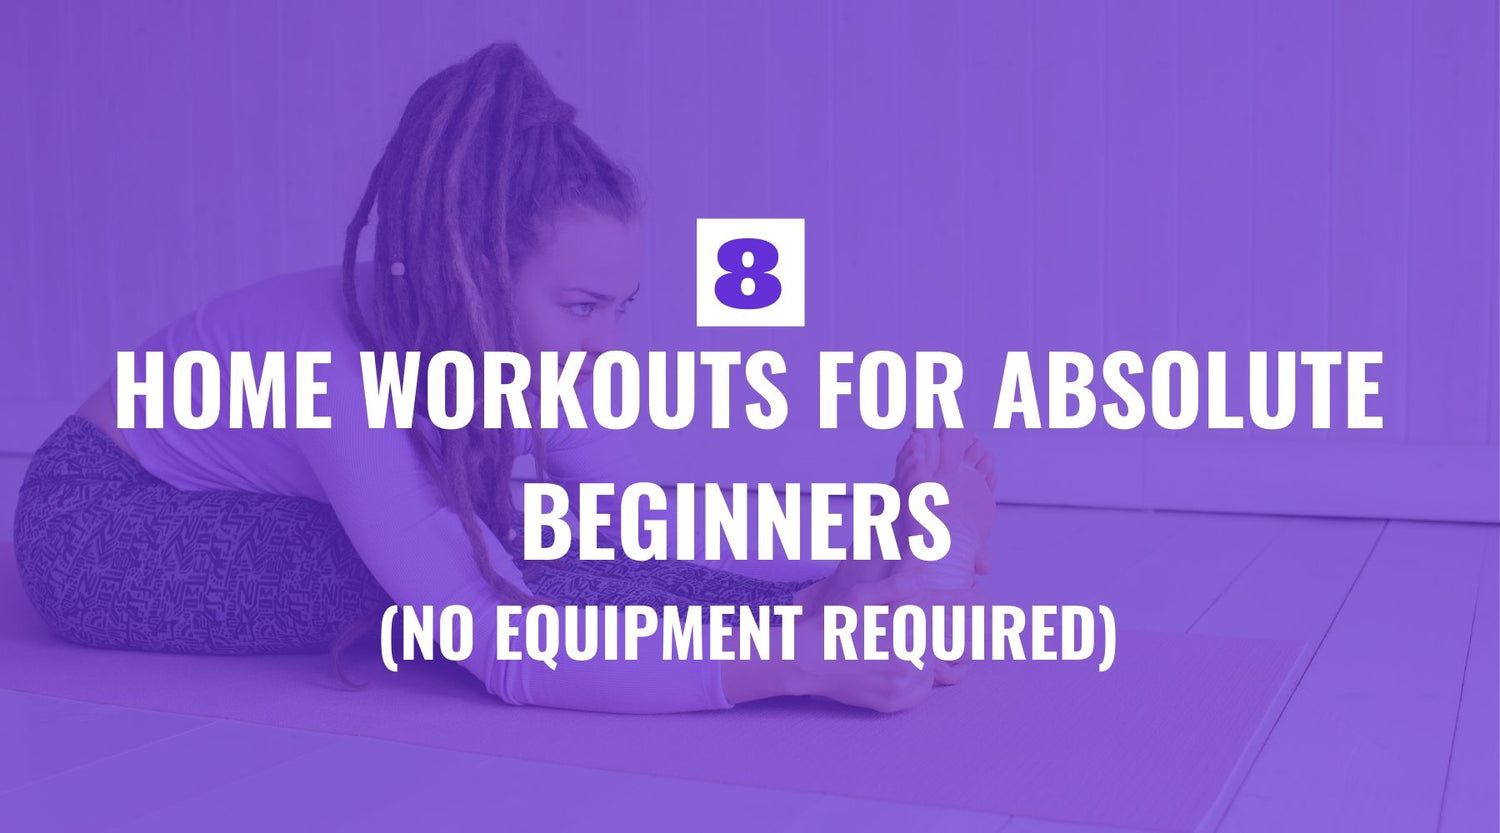 8 At Home Workouts for Absolute Beginners (No Equipment Required)